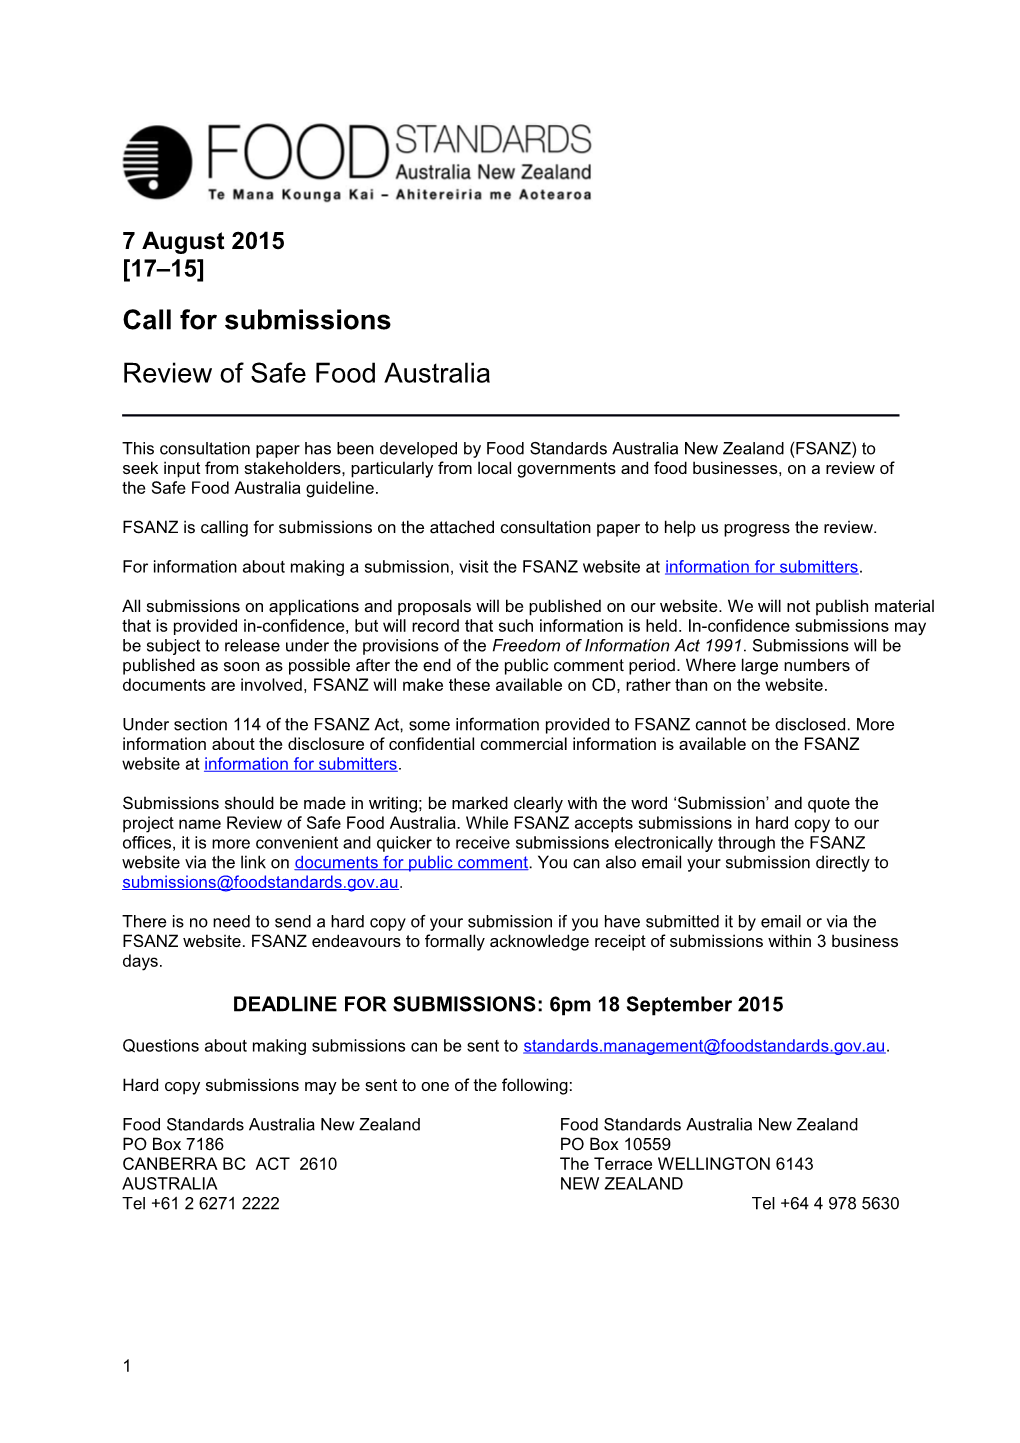 Food Safety Australia Review Consultation Paper